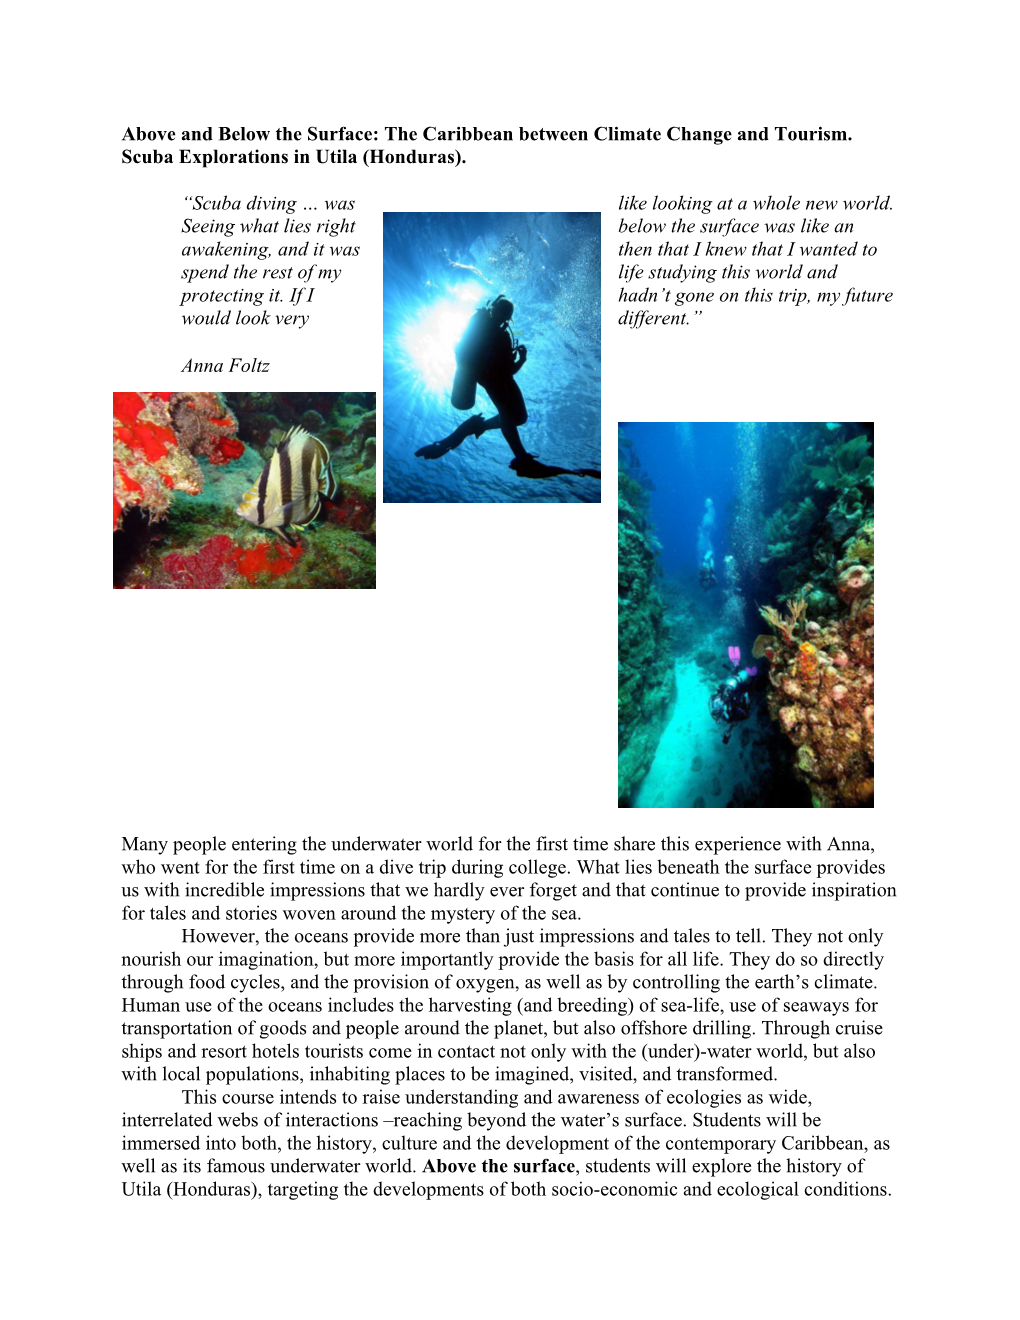 The Caribbean Between Climate Change and Tourism. Scuba Explorations in Utila (Honduras)